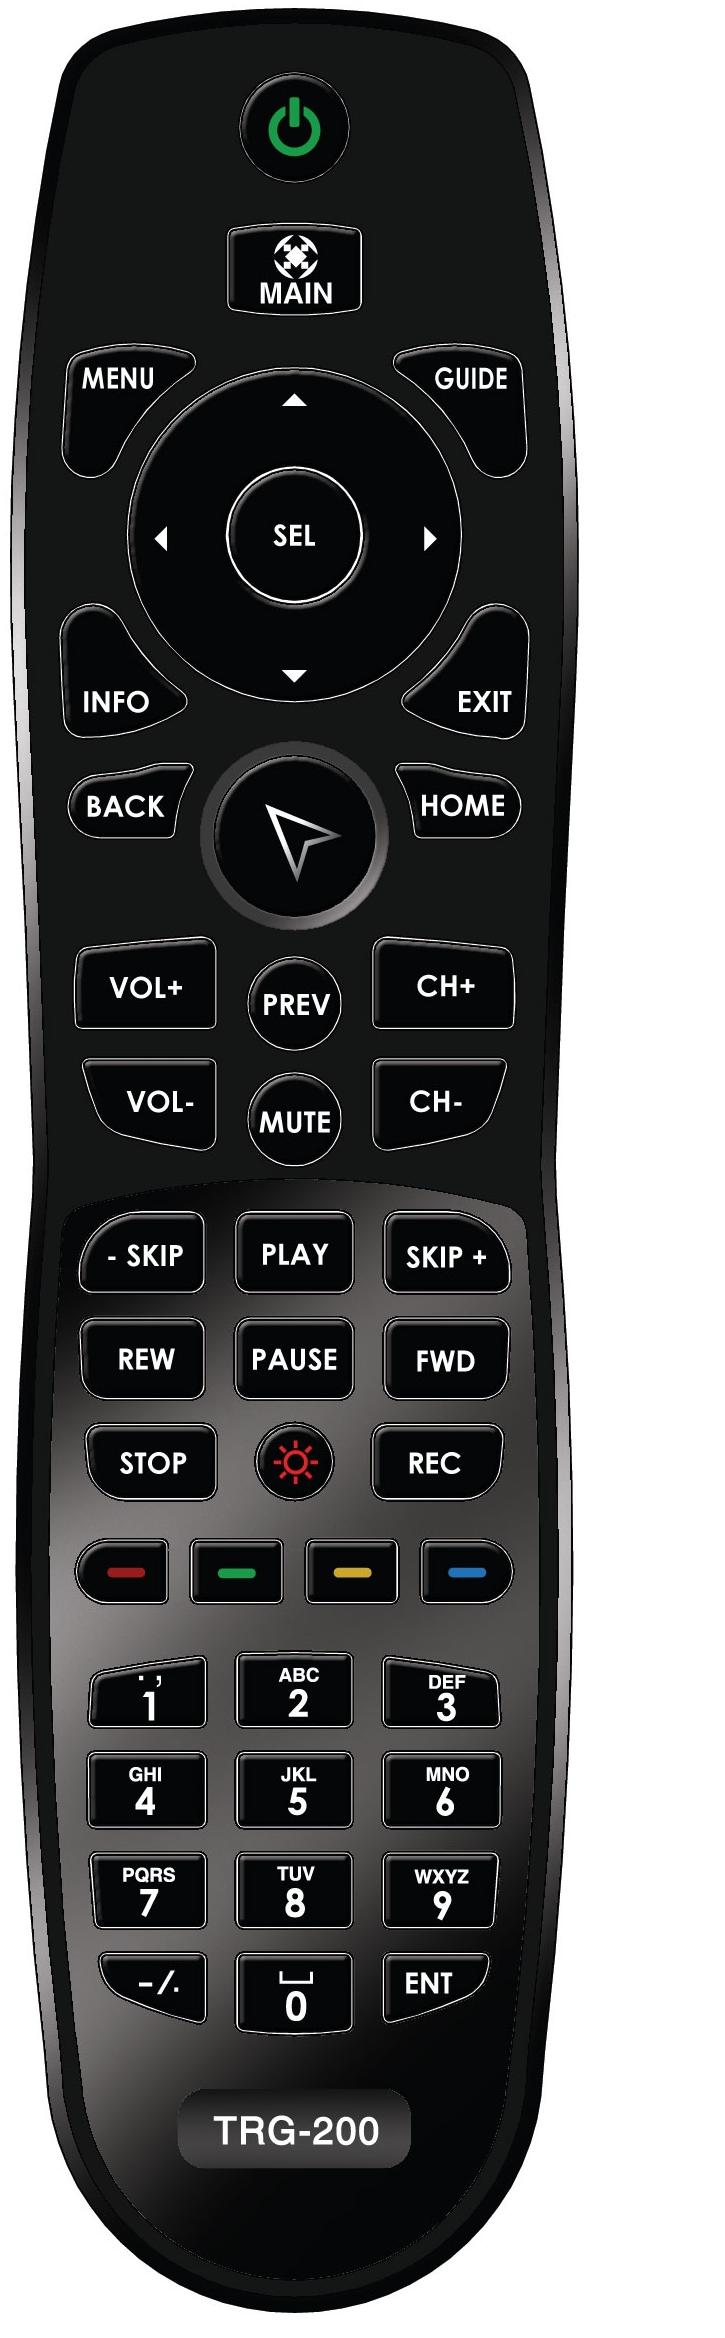 Using the TRG-200 Umotion Remote The TRG-200 remote consists of basic buttons found on many other remotes with the exception of the special Umotion button.